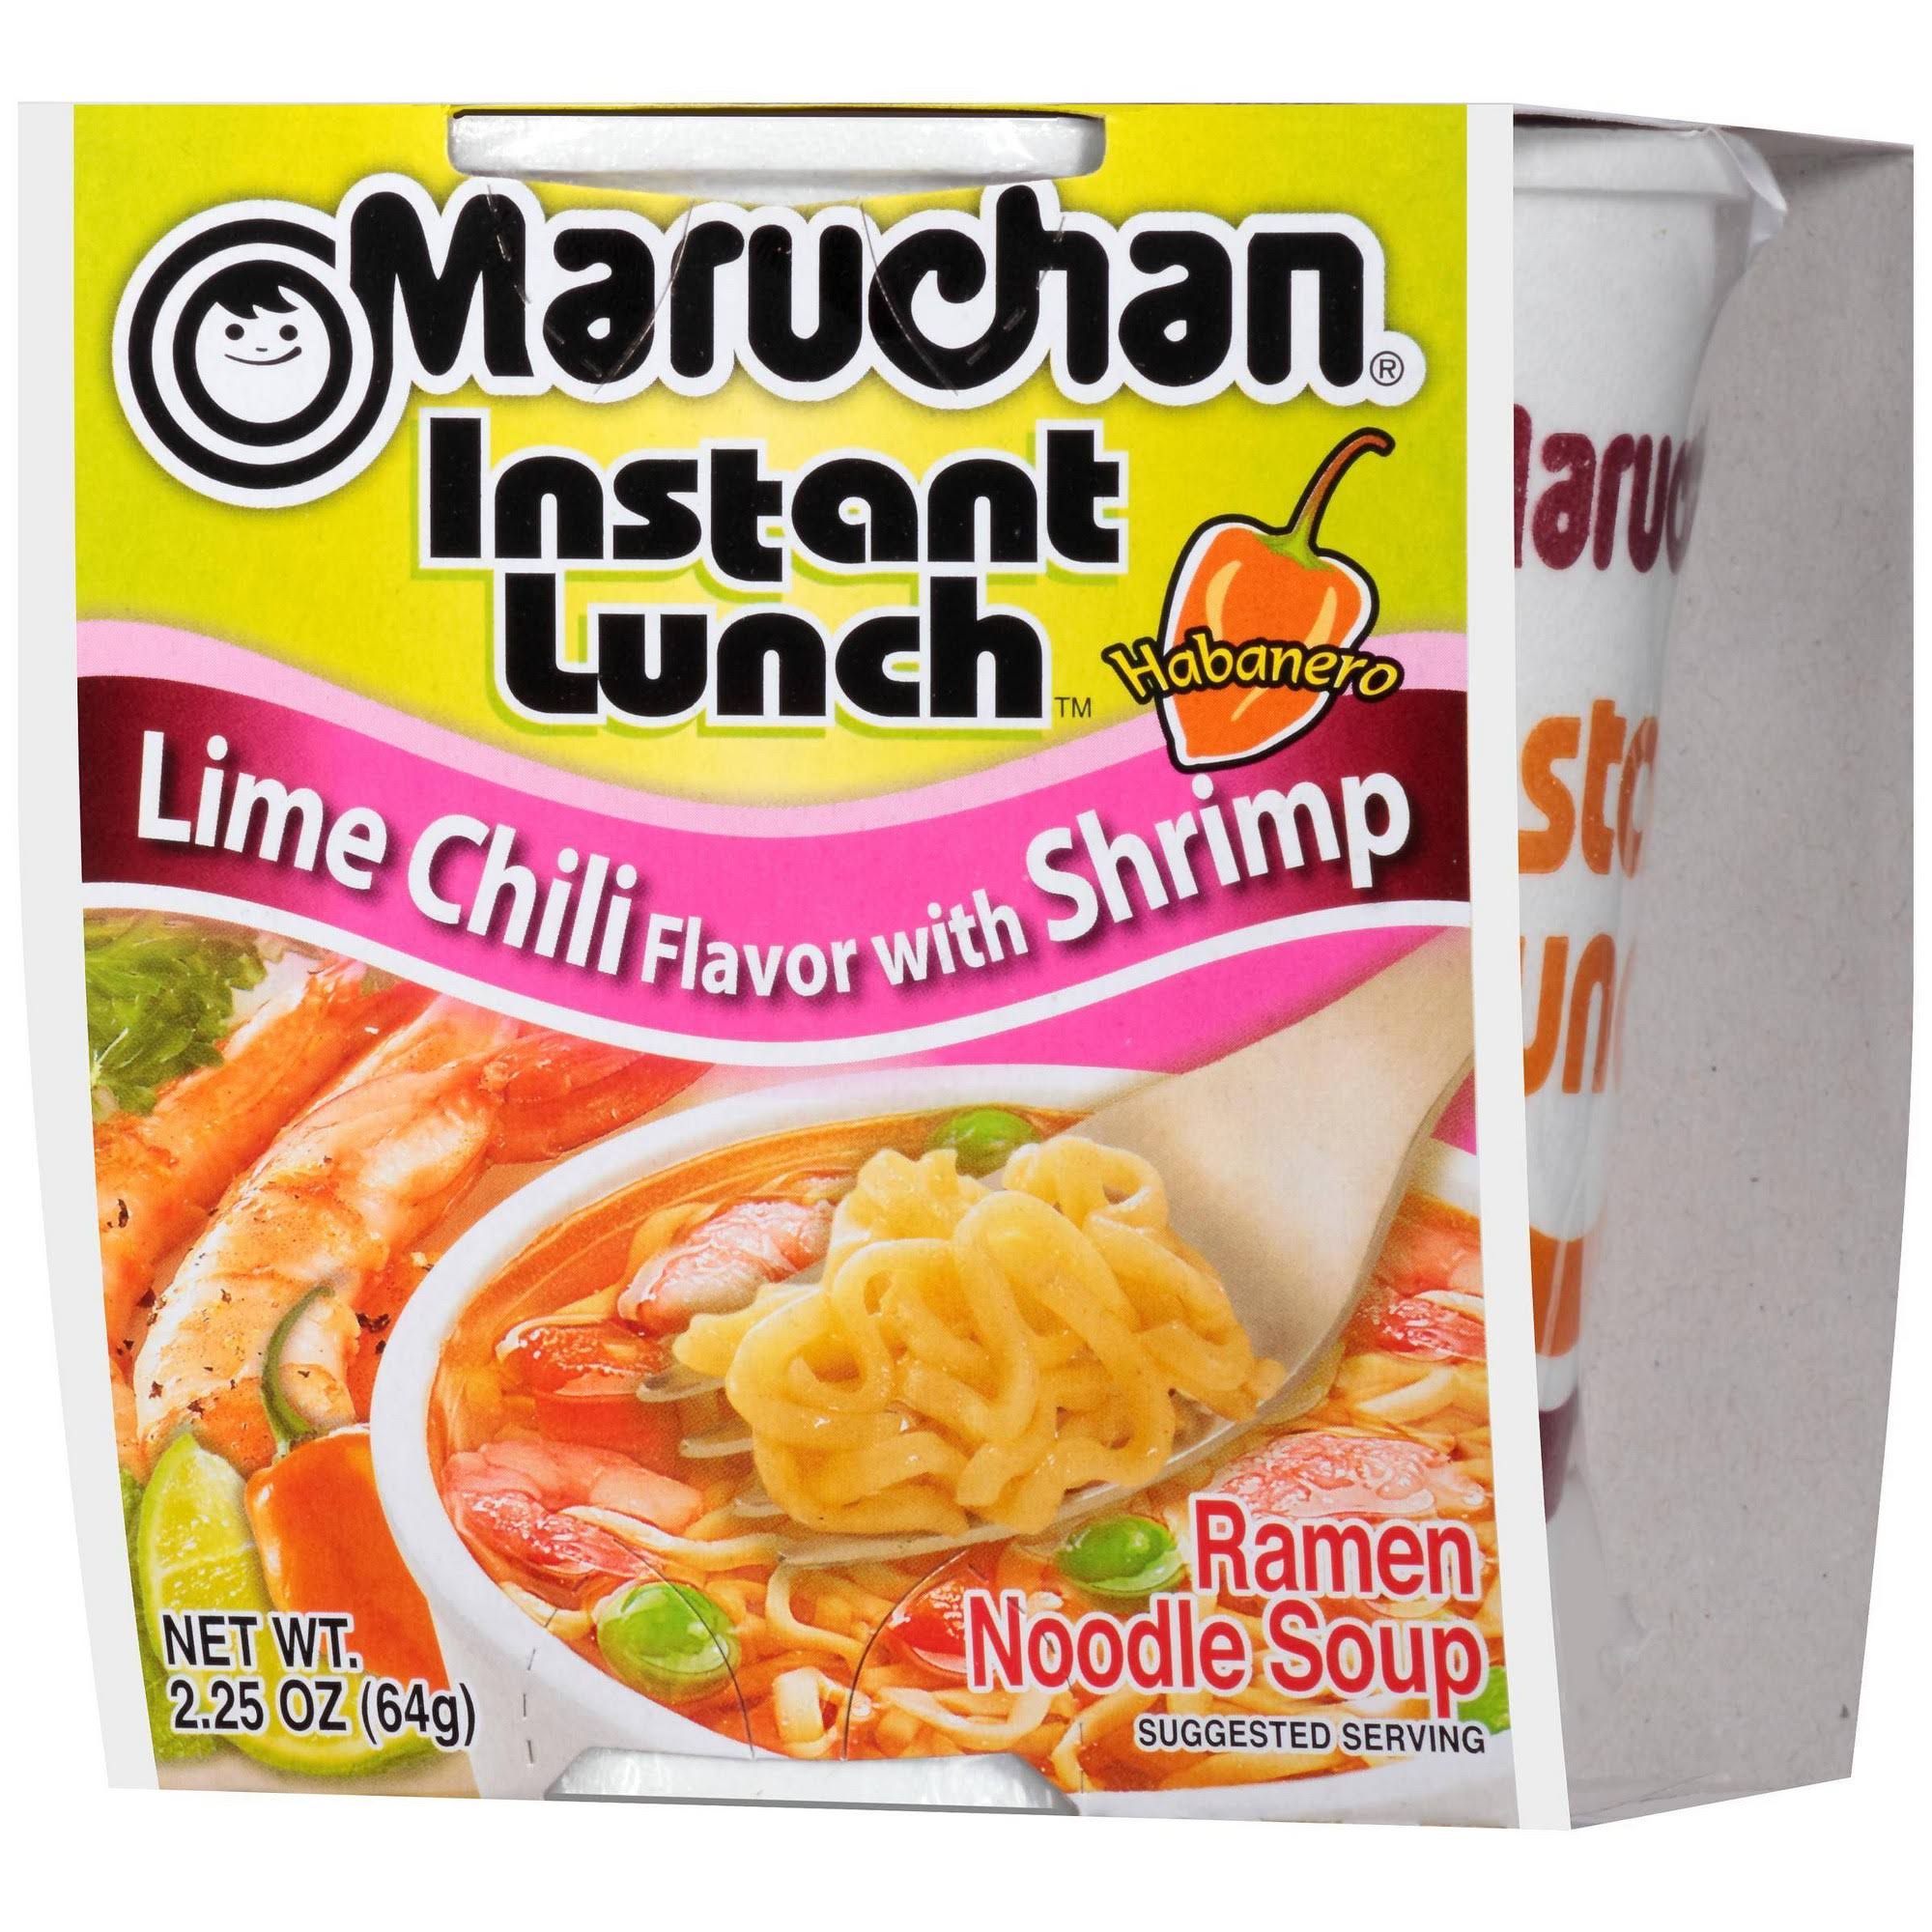 Maruchan Instant Lunch - Lime Chili Flavor With Shrimp, 2.25oz